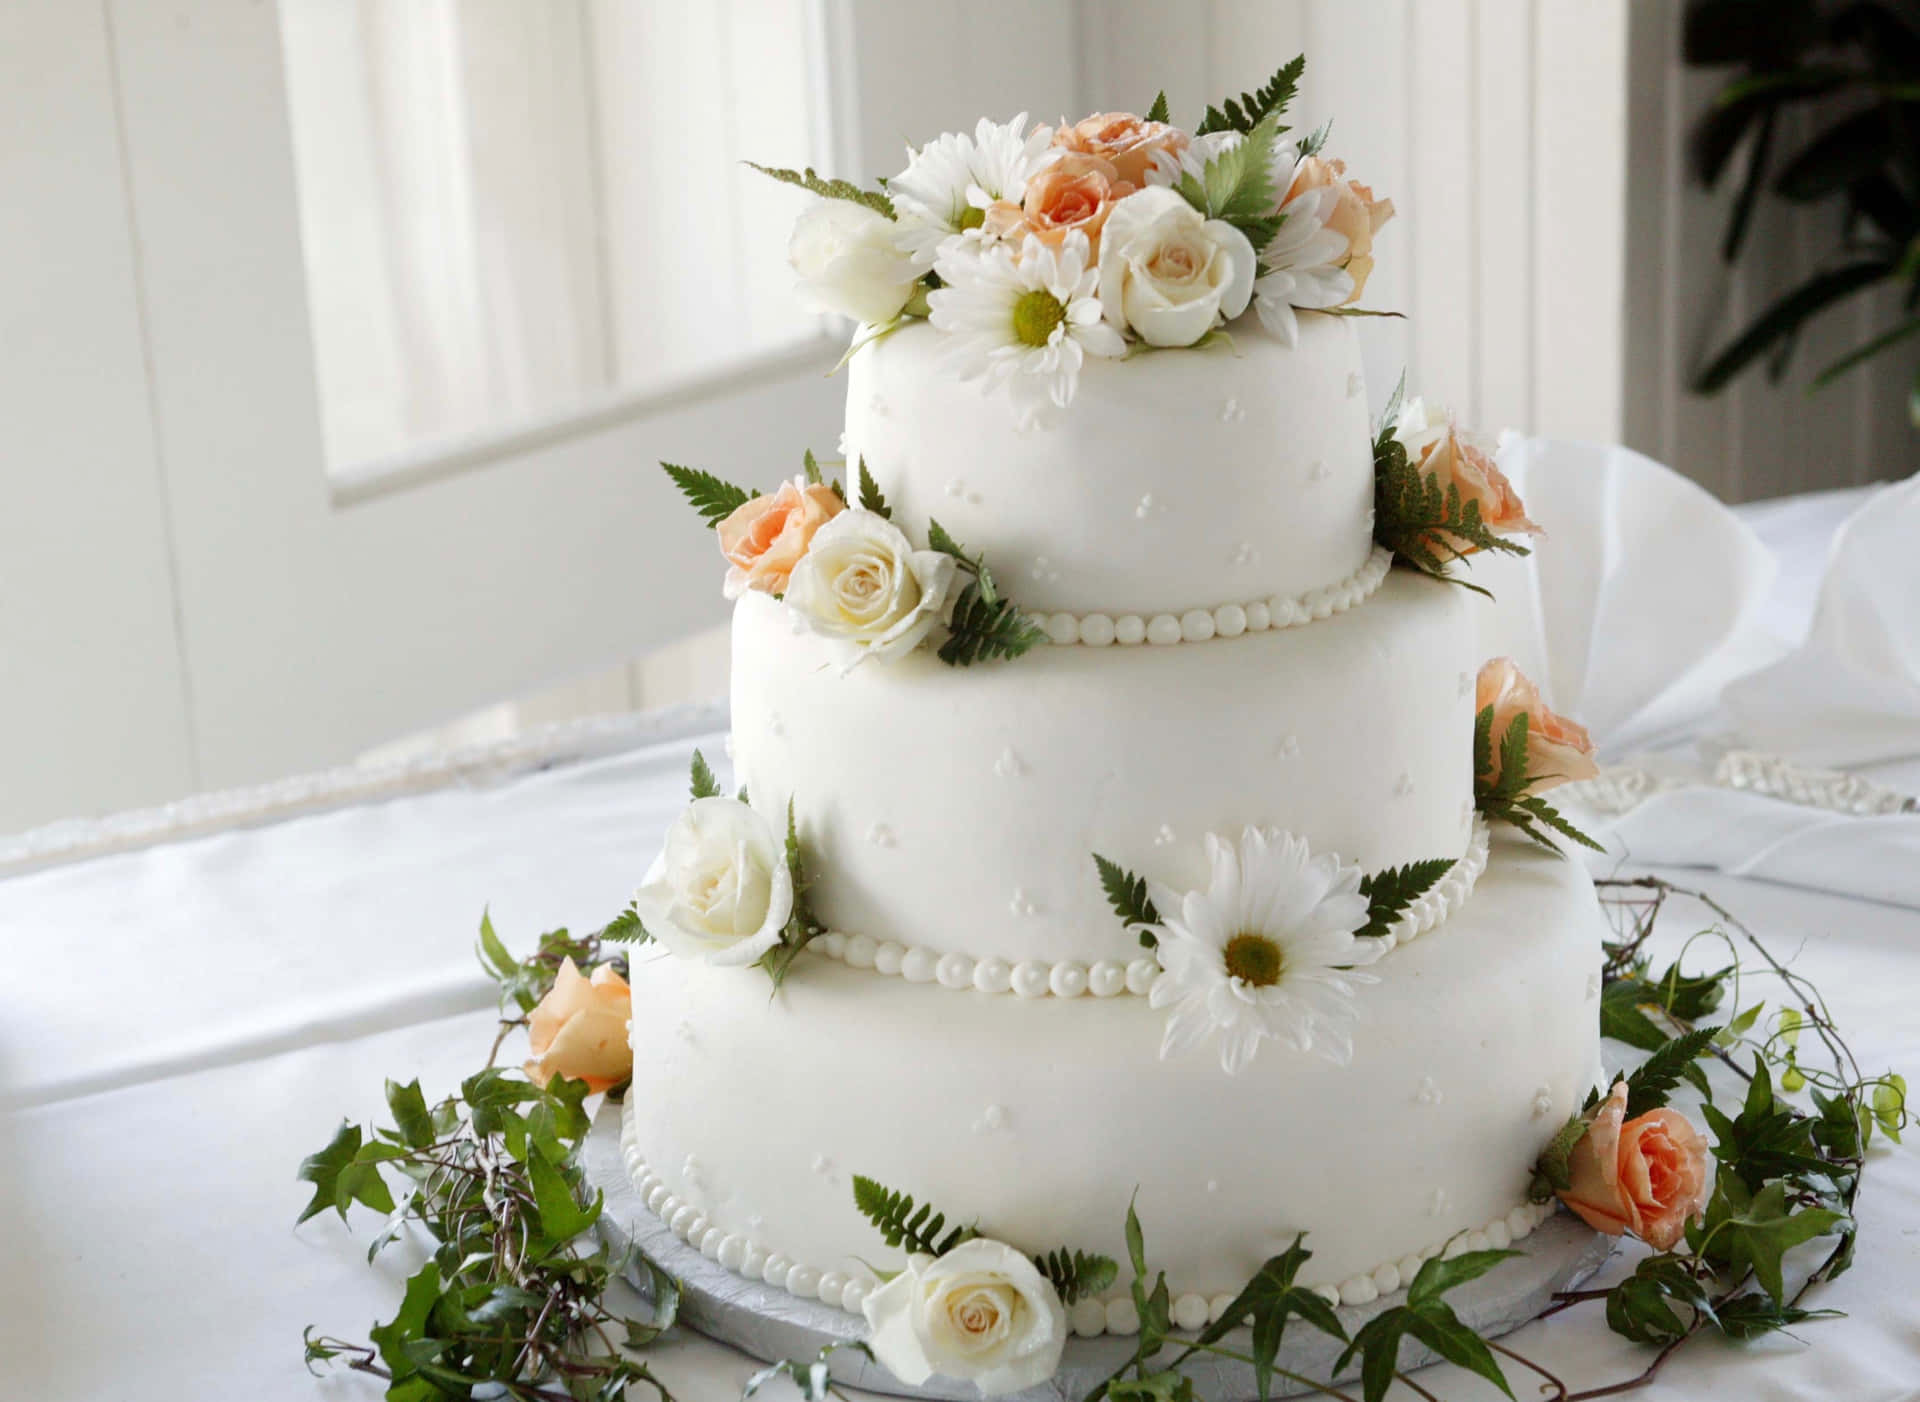 Delightful Floral Cake with Vibrant Edible Flowers Wallpaper